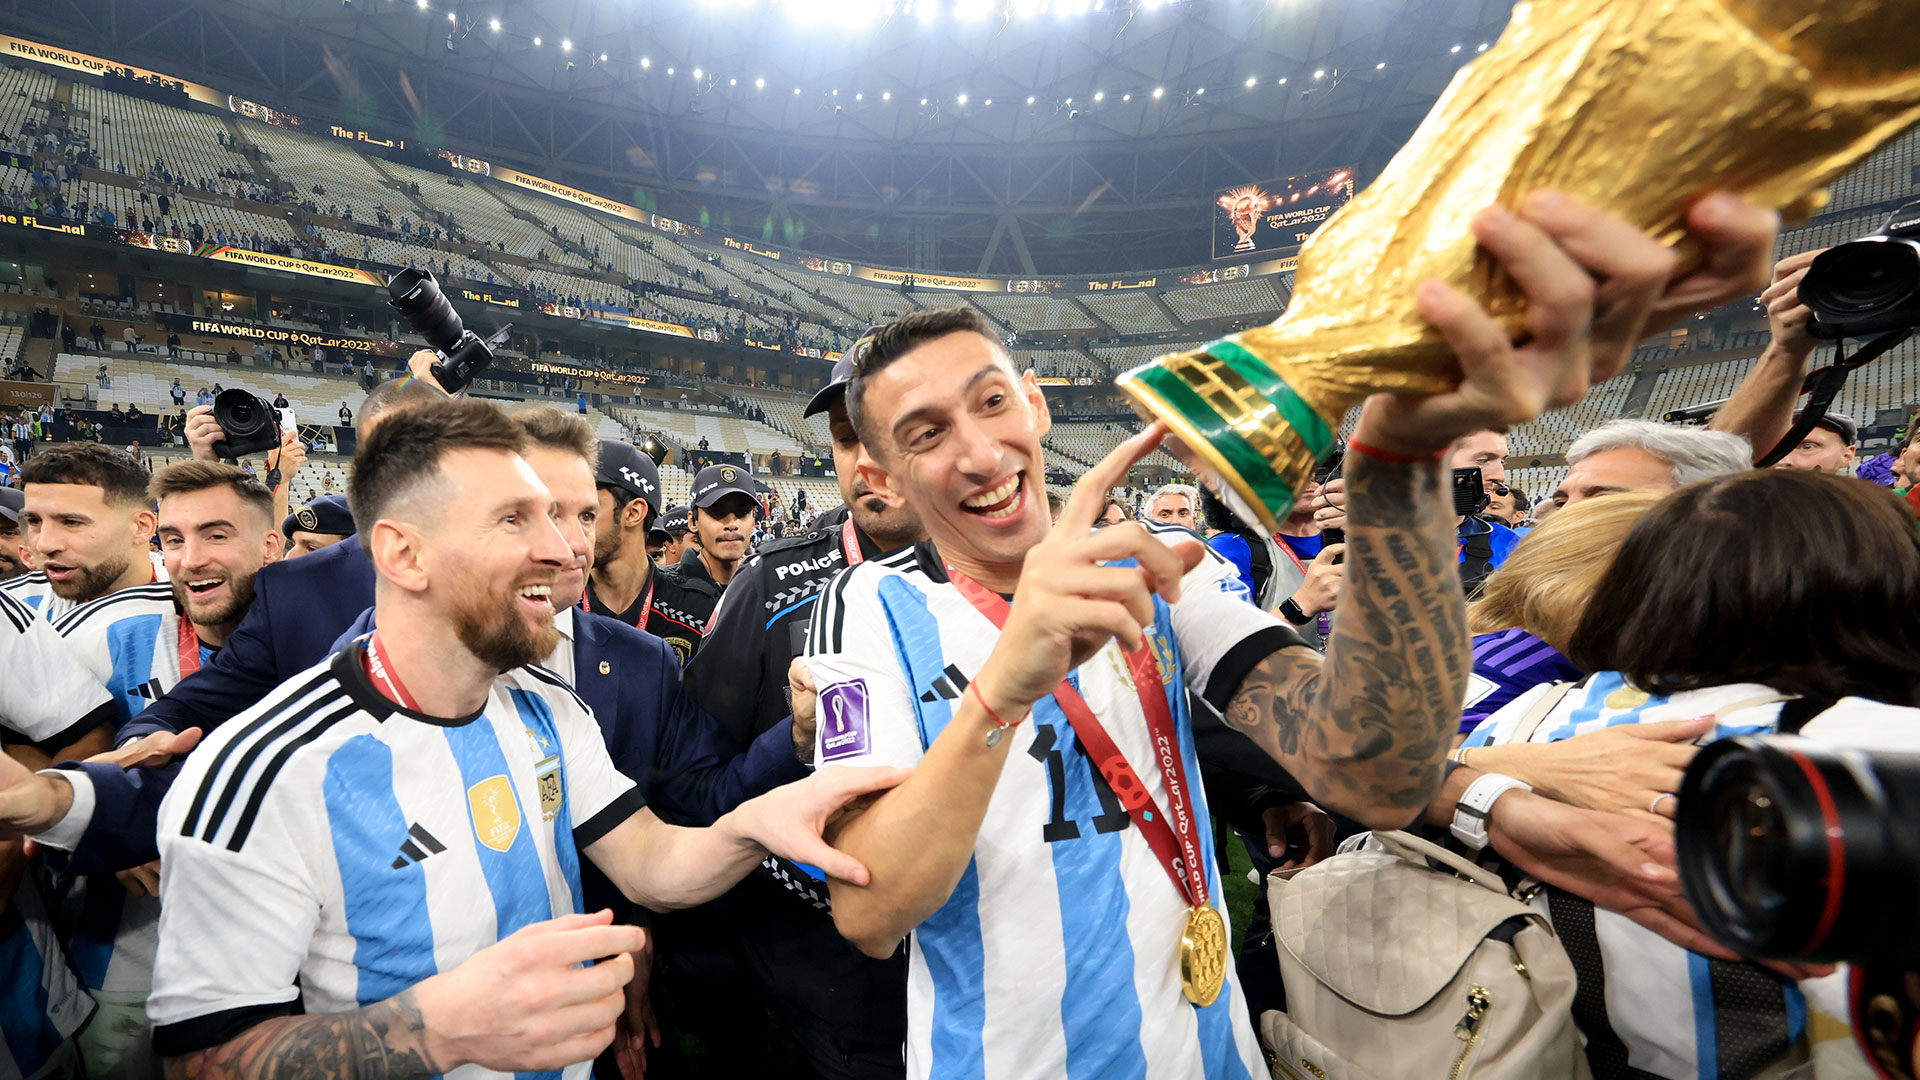 LUSAIL CITY, QATAR - DECEMBER 18: Lionel Messi and Ángel Di María of Argentina hold the FIFA World Cup Qatar 2022 Winner's Trophy after winning the FIFA World Cup Qatar 2022 Final match between Argentina and France at Lusail Stadium on December 18, 2022 in Lusail City, Qatar. (Photo by Gustavo Pagano/Getty Images)